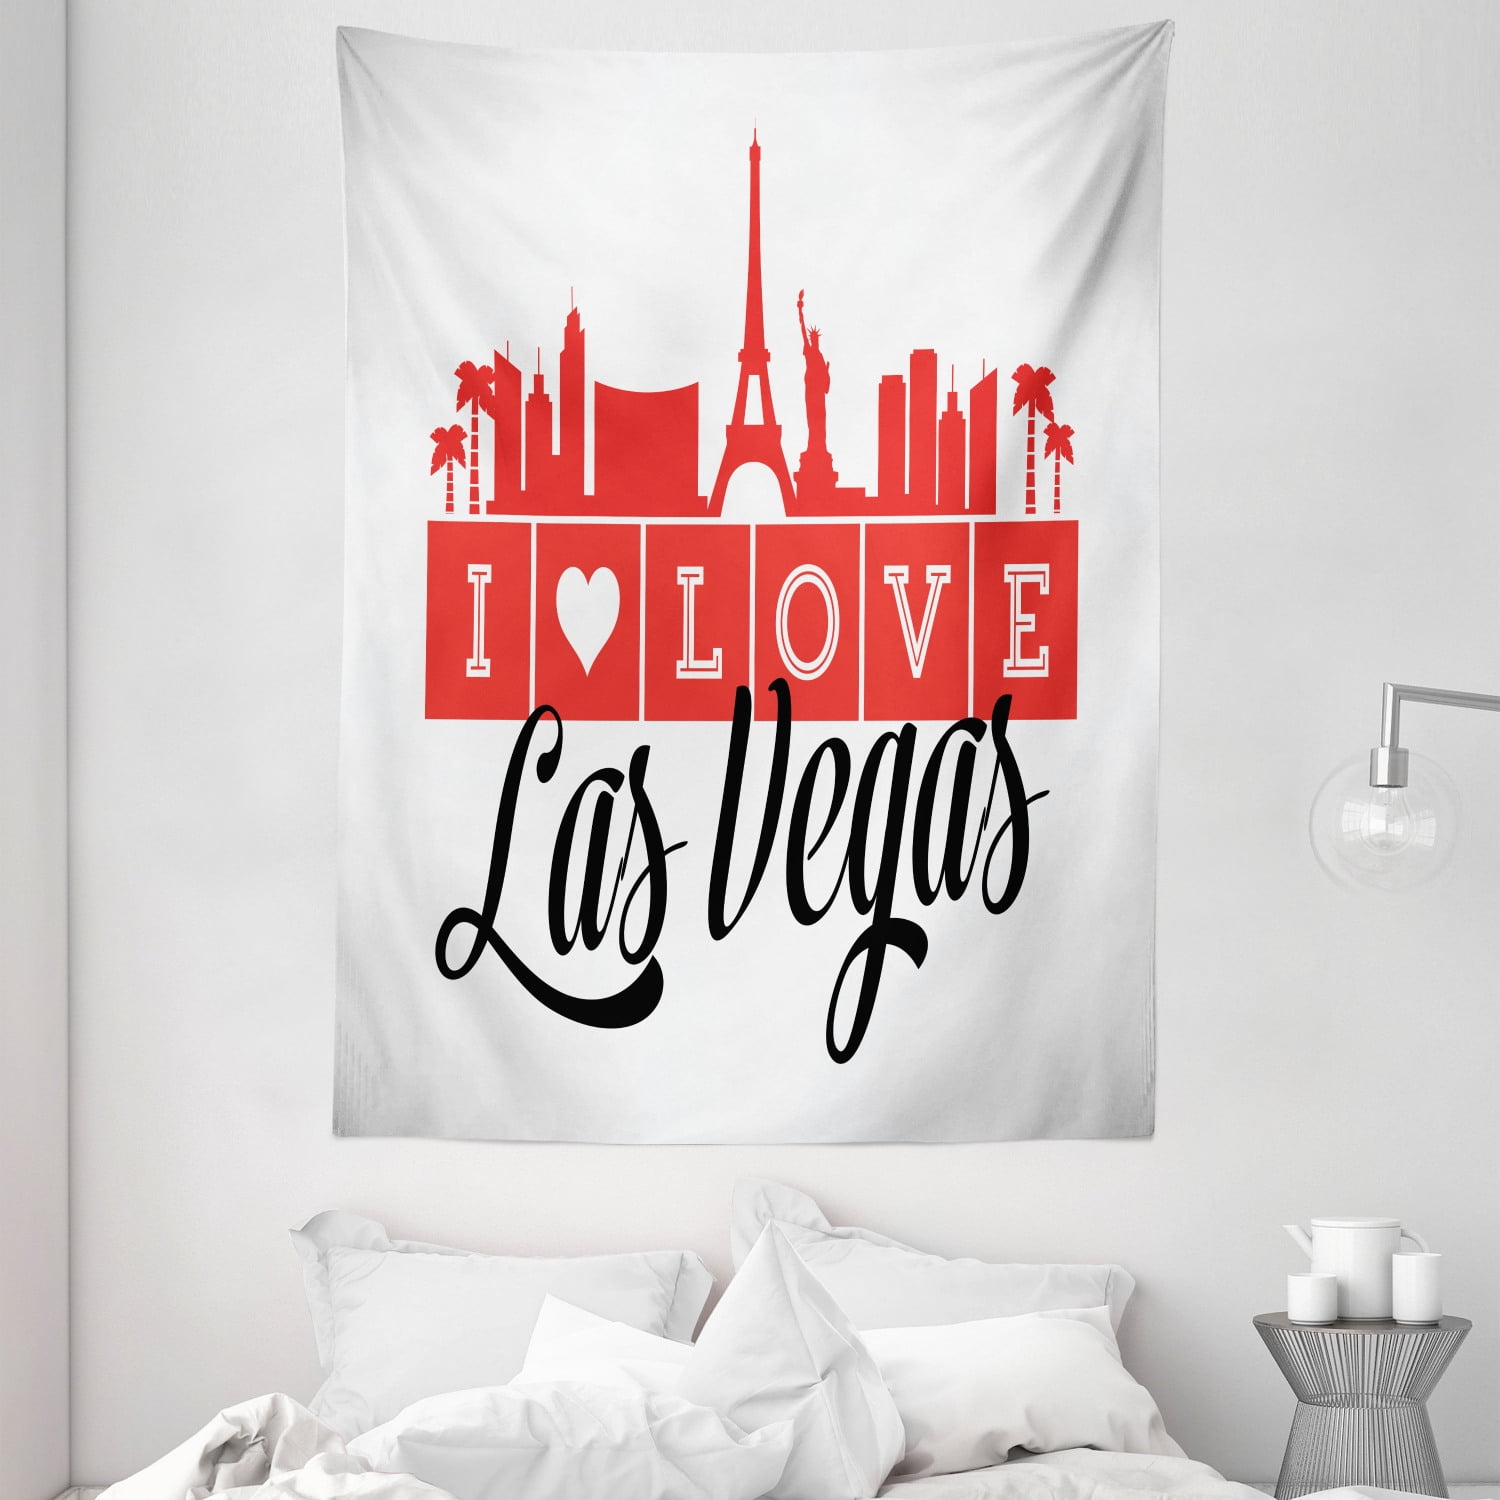 Ambesonne Las Vegas Tapestry, I Love Las Vegas Writing with Silhouette Style Landmarks Pattern, Wall Hanging for Bedroom Living Room Dorm Decor, 40W x 60L